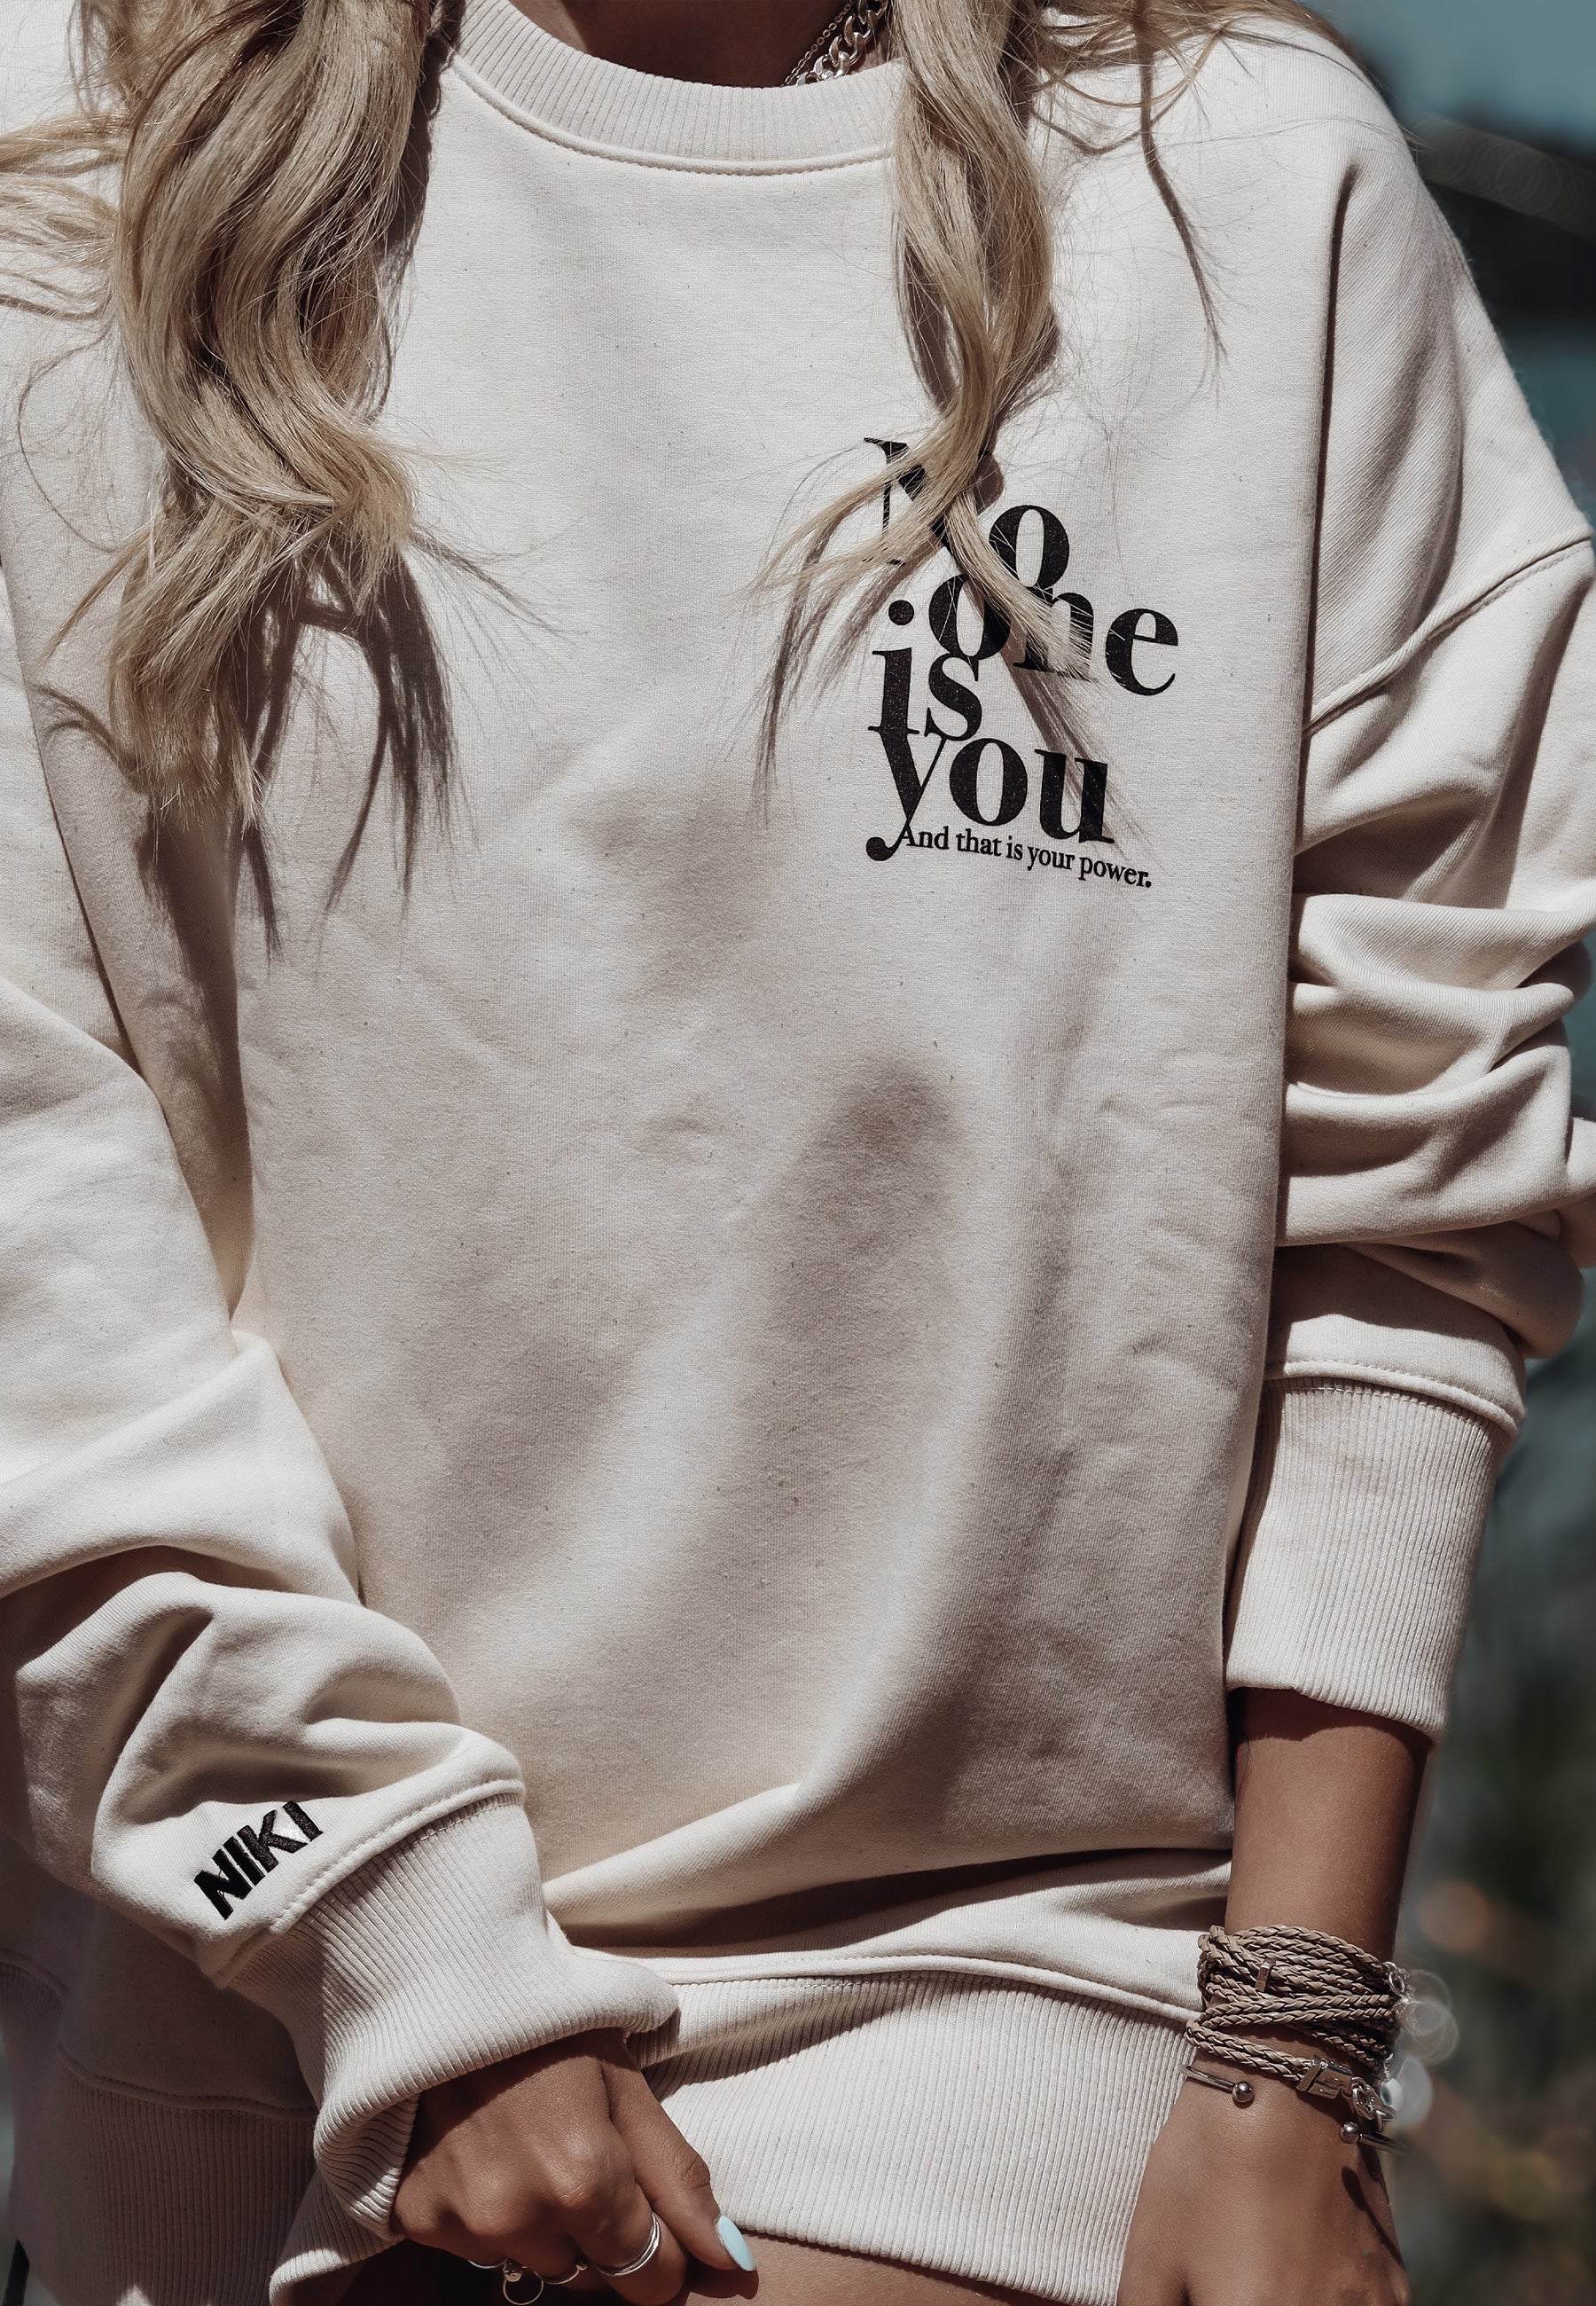 NO ONE IS YOU mit Personalisierung Sweater Natural Raw